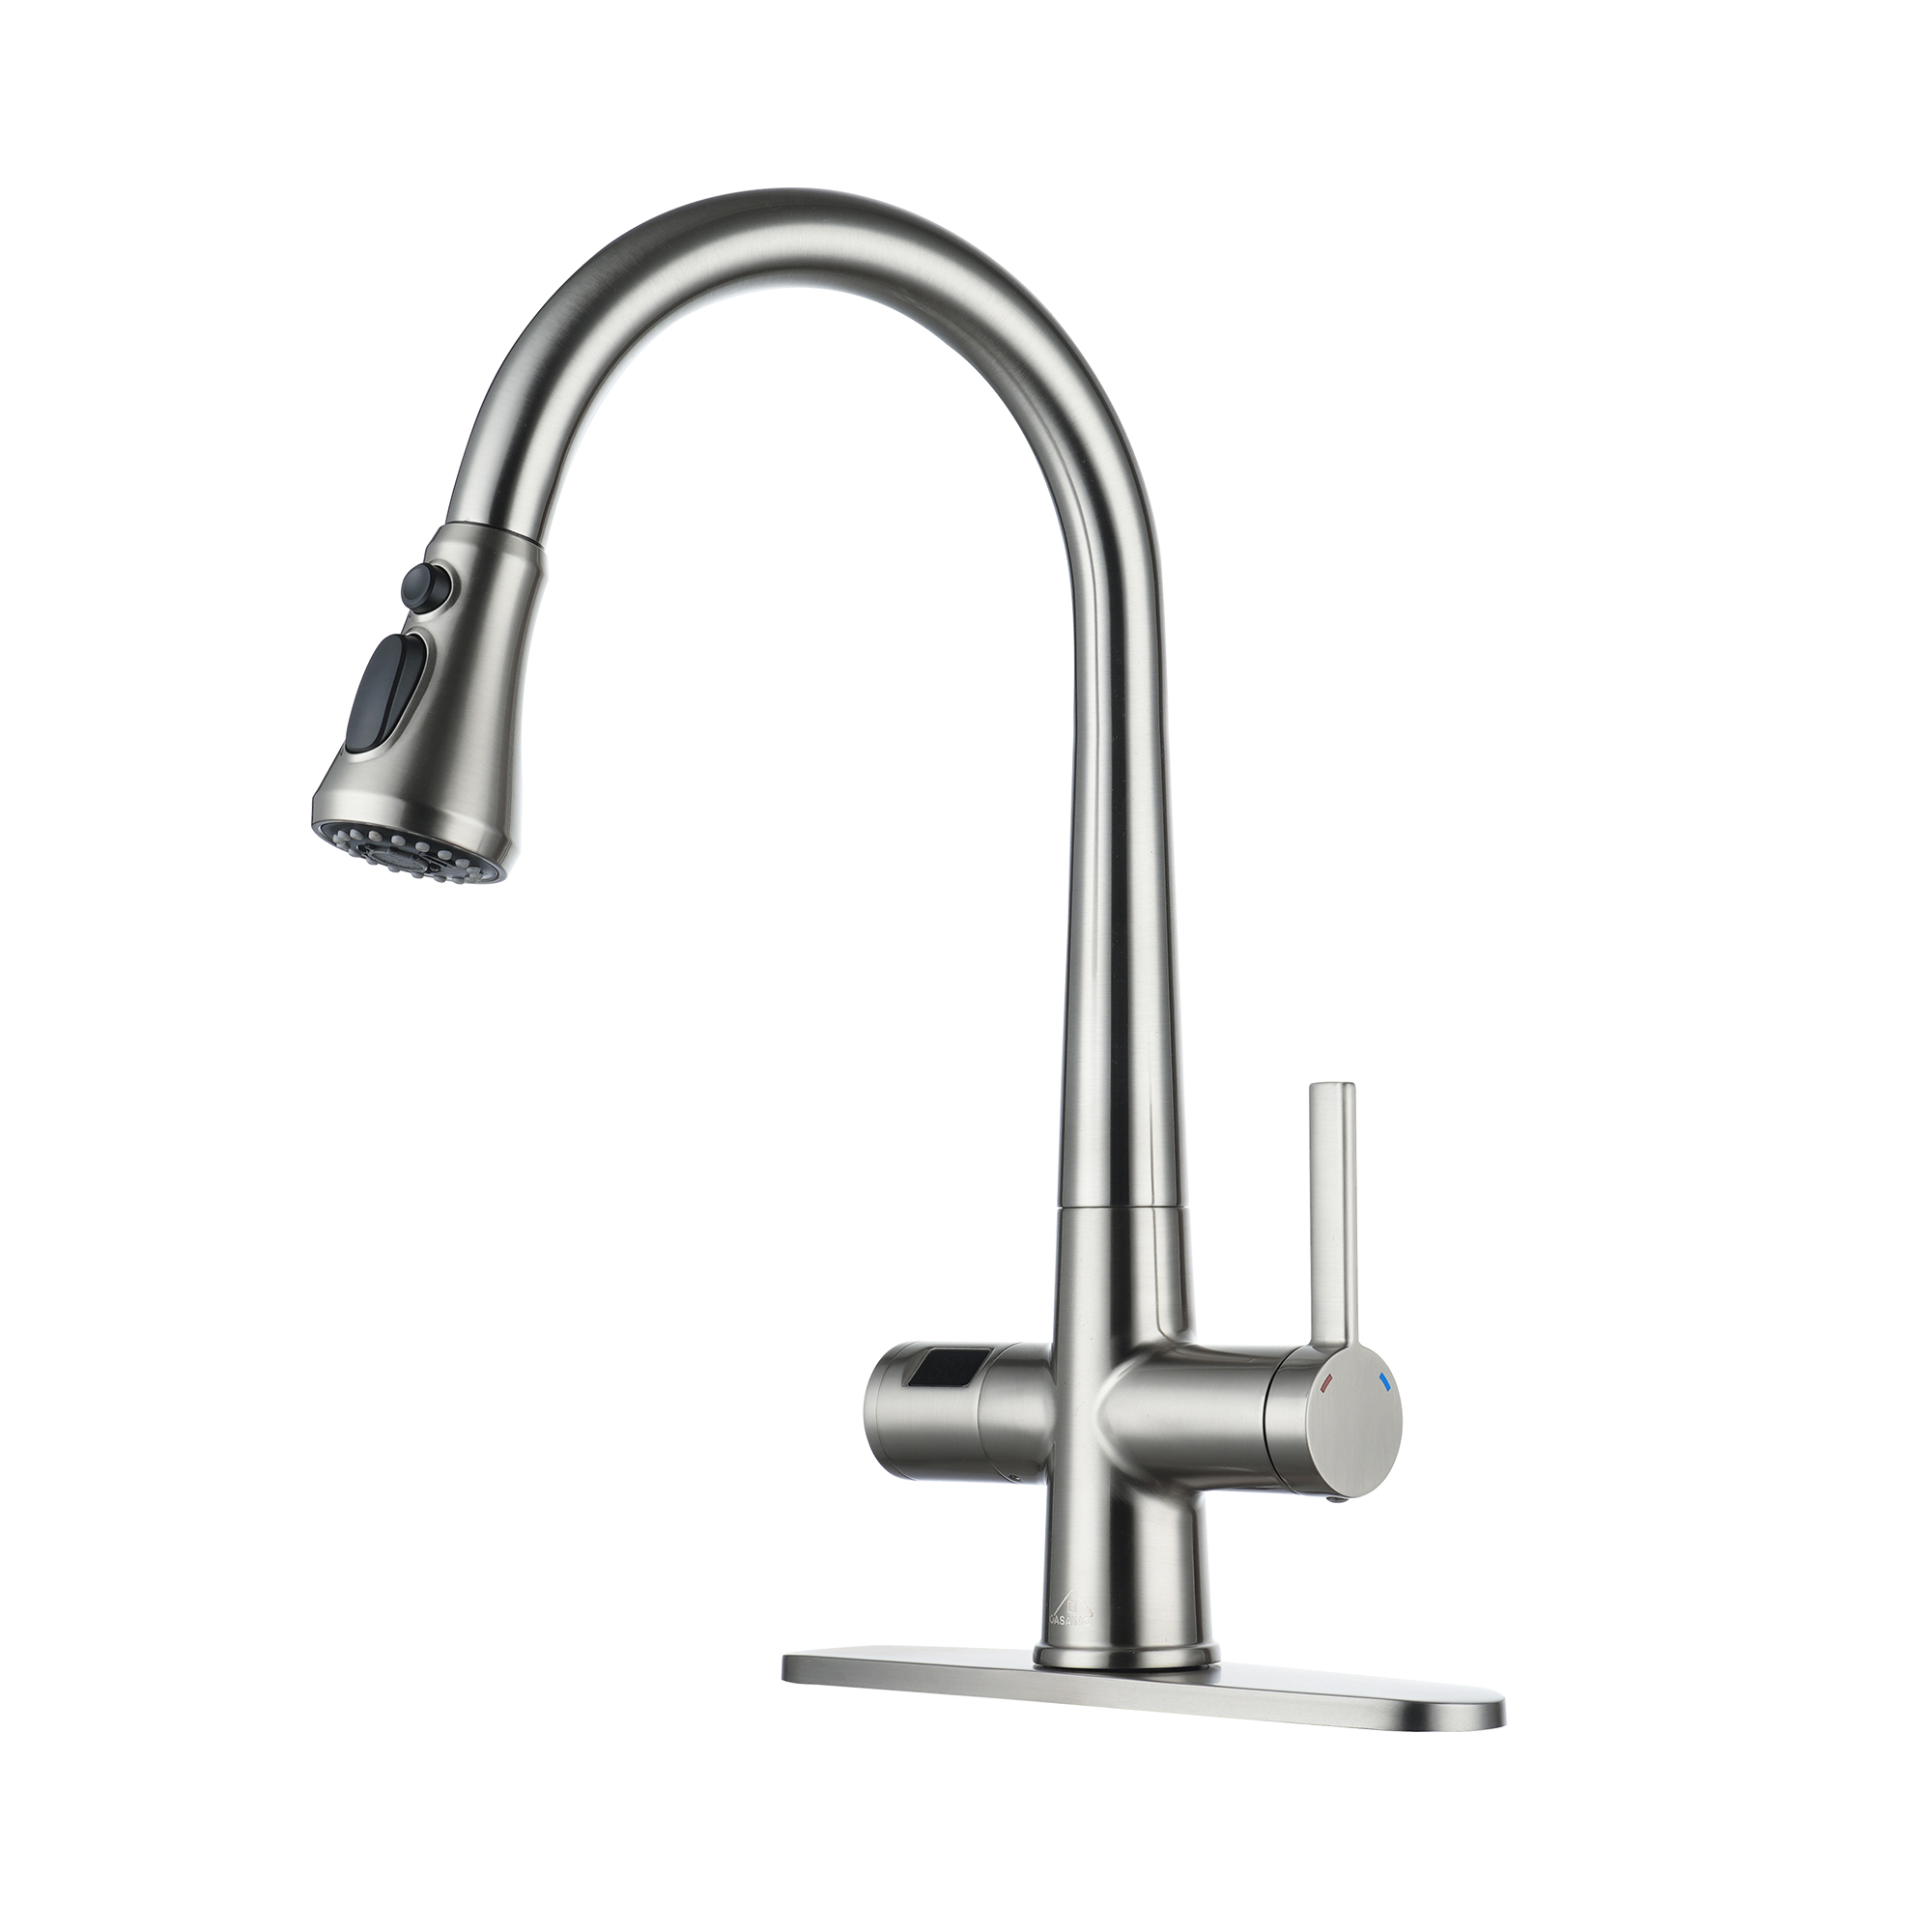 CASAINC Single-Handle Pull-Out Sprayer Kitchen Faucet with Digital Display single hole deck plate single handle type